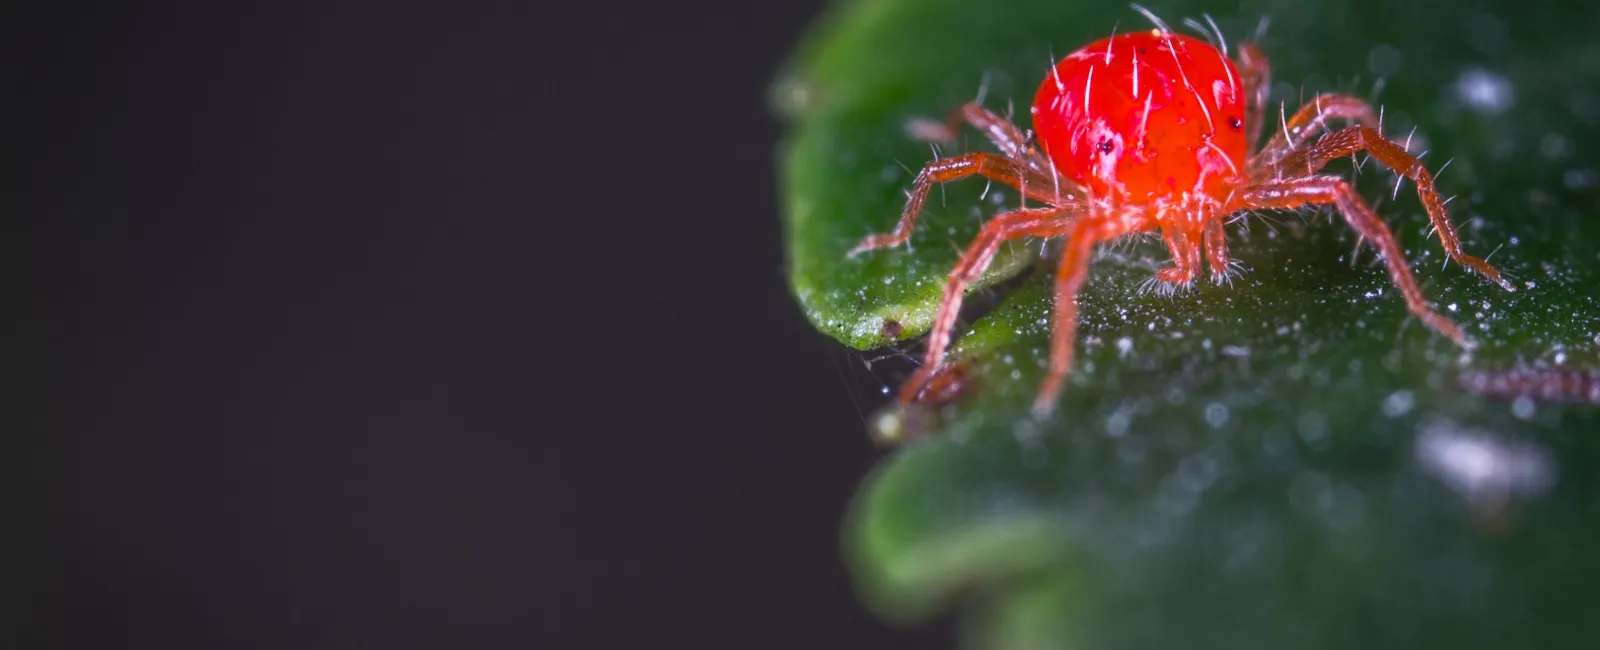 Featured image for “How to Identify Spider Mites”